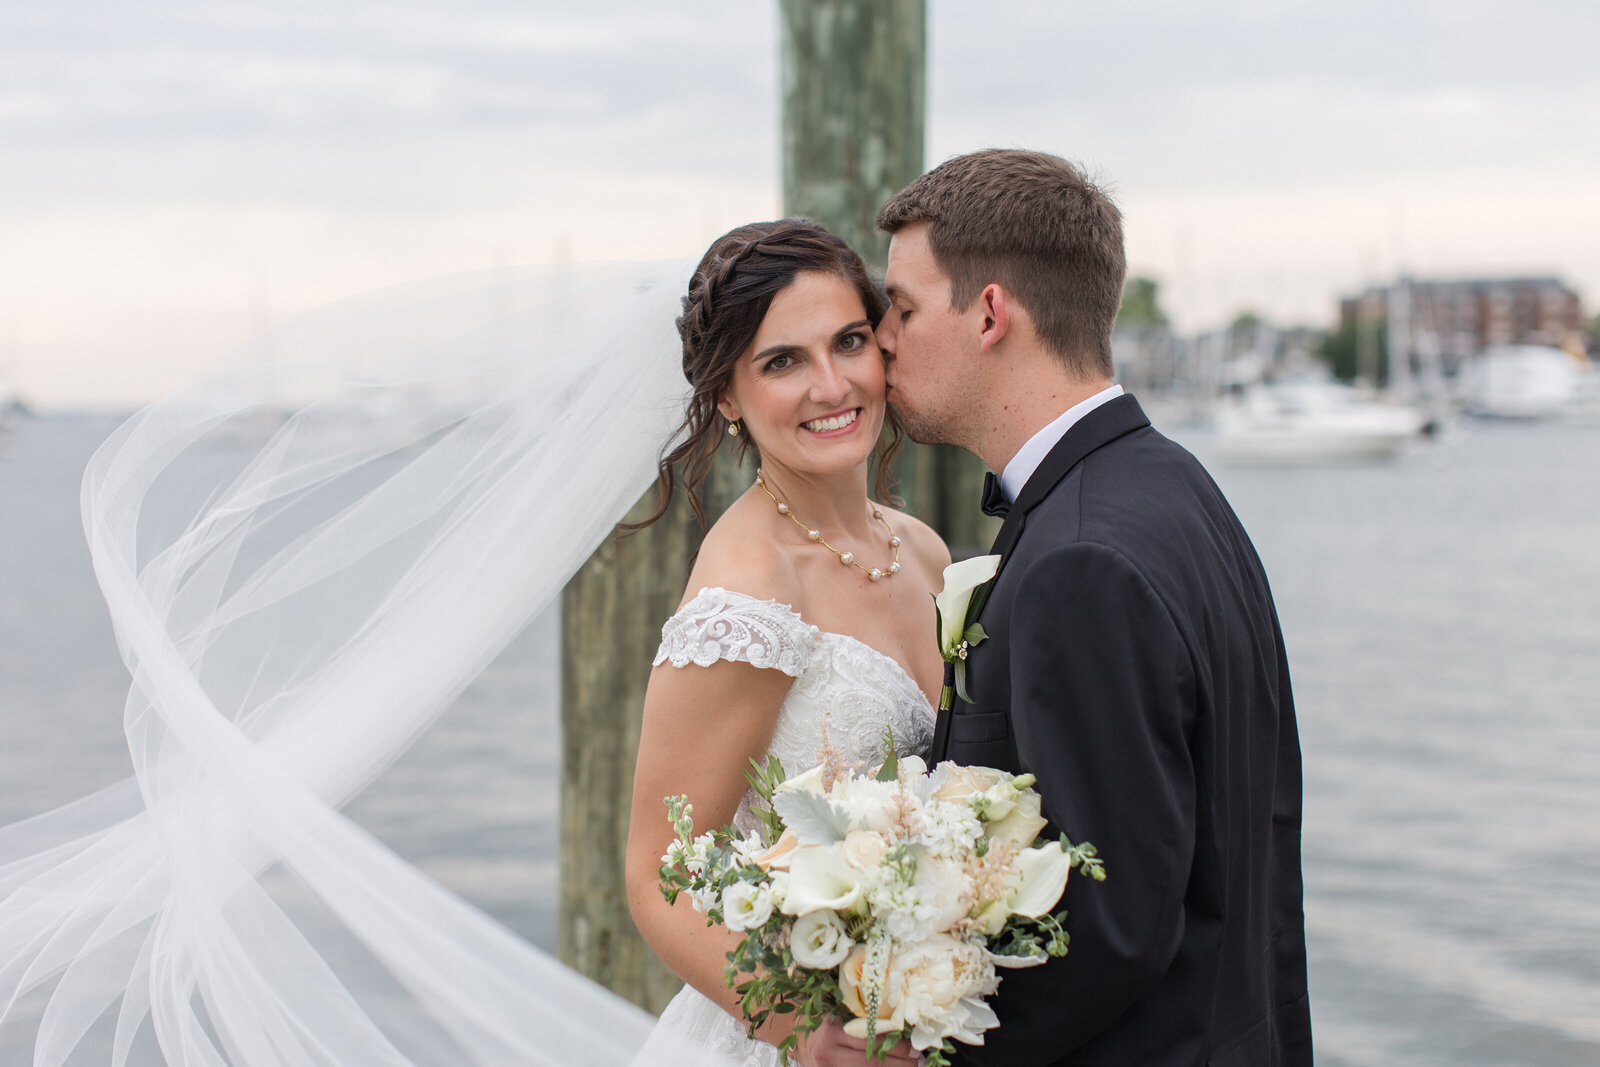 Graduate Annapolis wedding photo of couple at city dock by Maryland photographer Christa Rae Photography